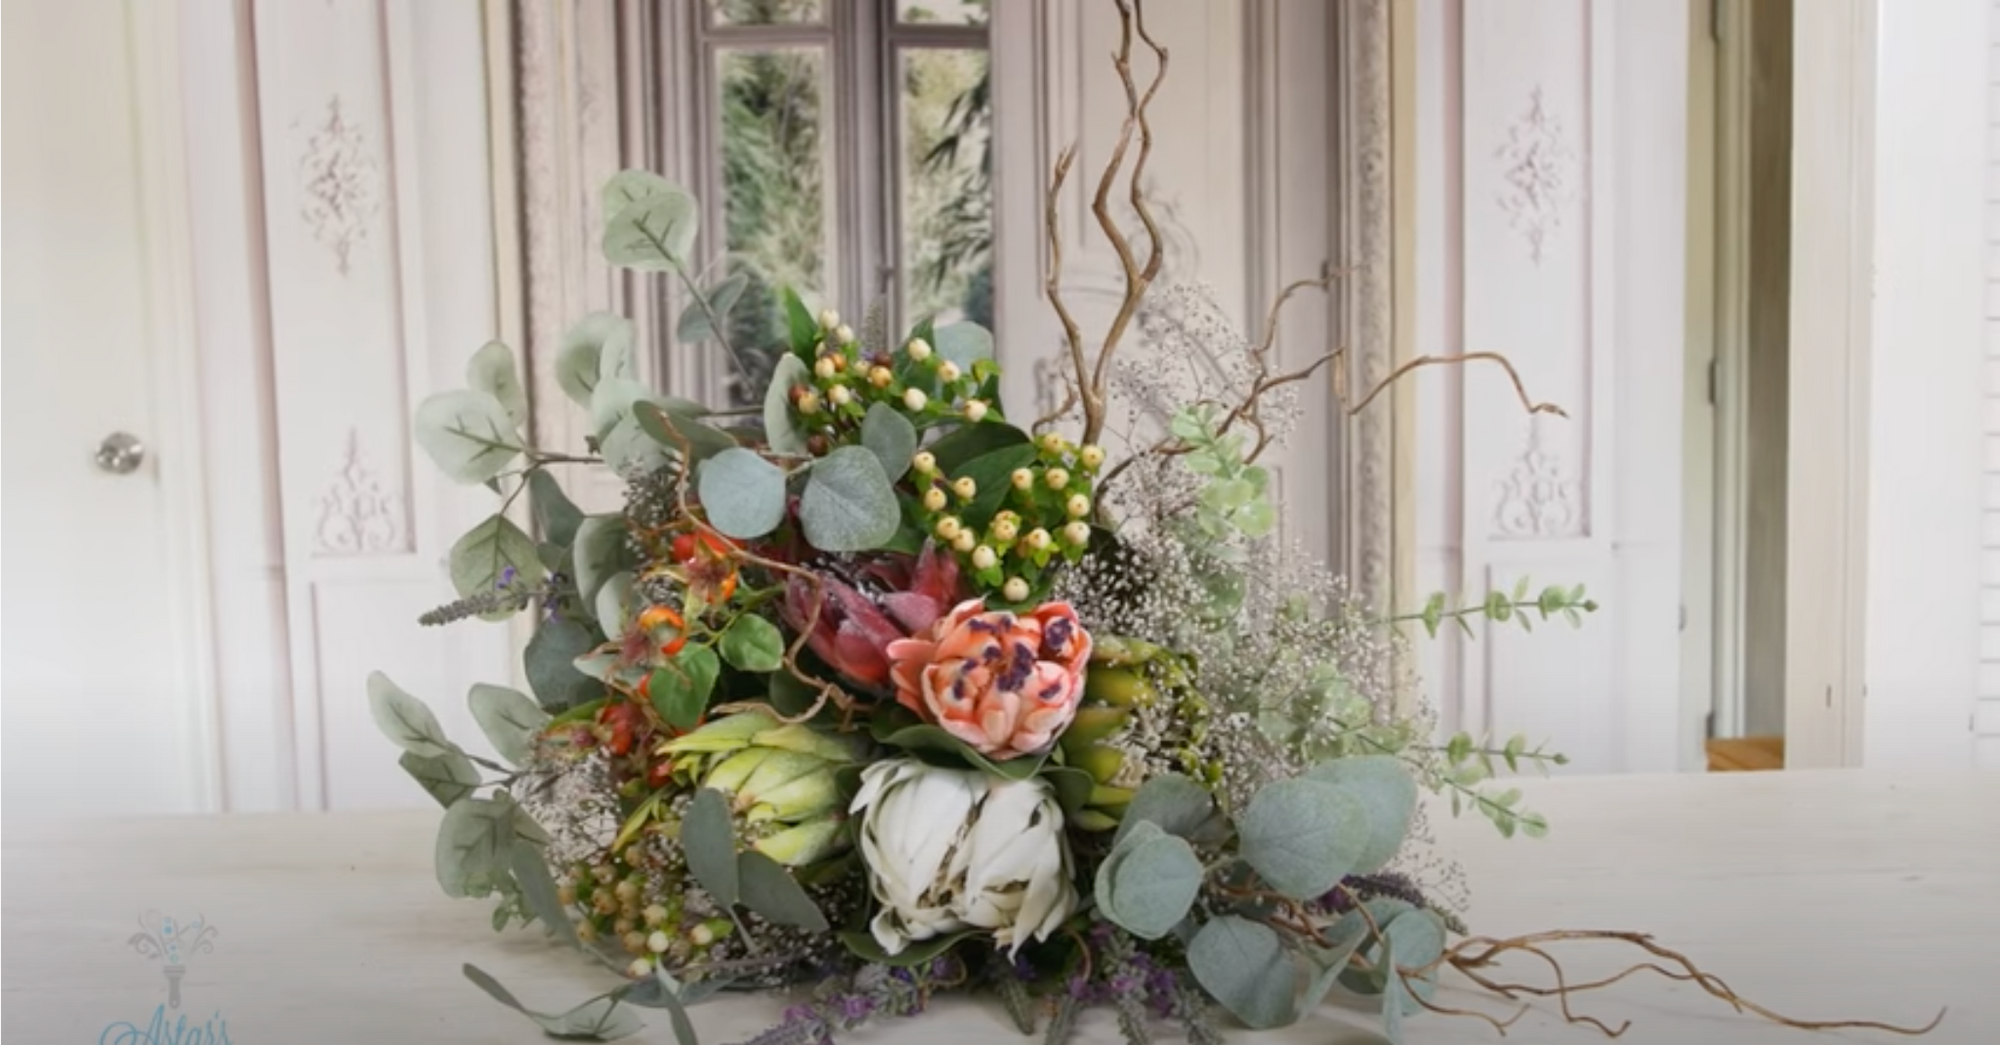 How to make a Rustic Wedding Bouquet of Mixed Proteas, Lavender, Berries & Foliage